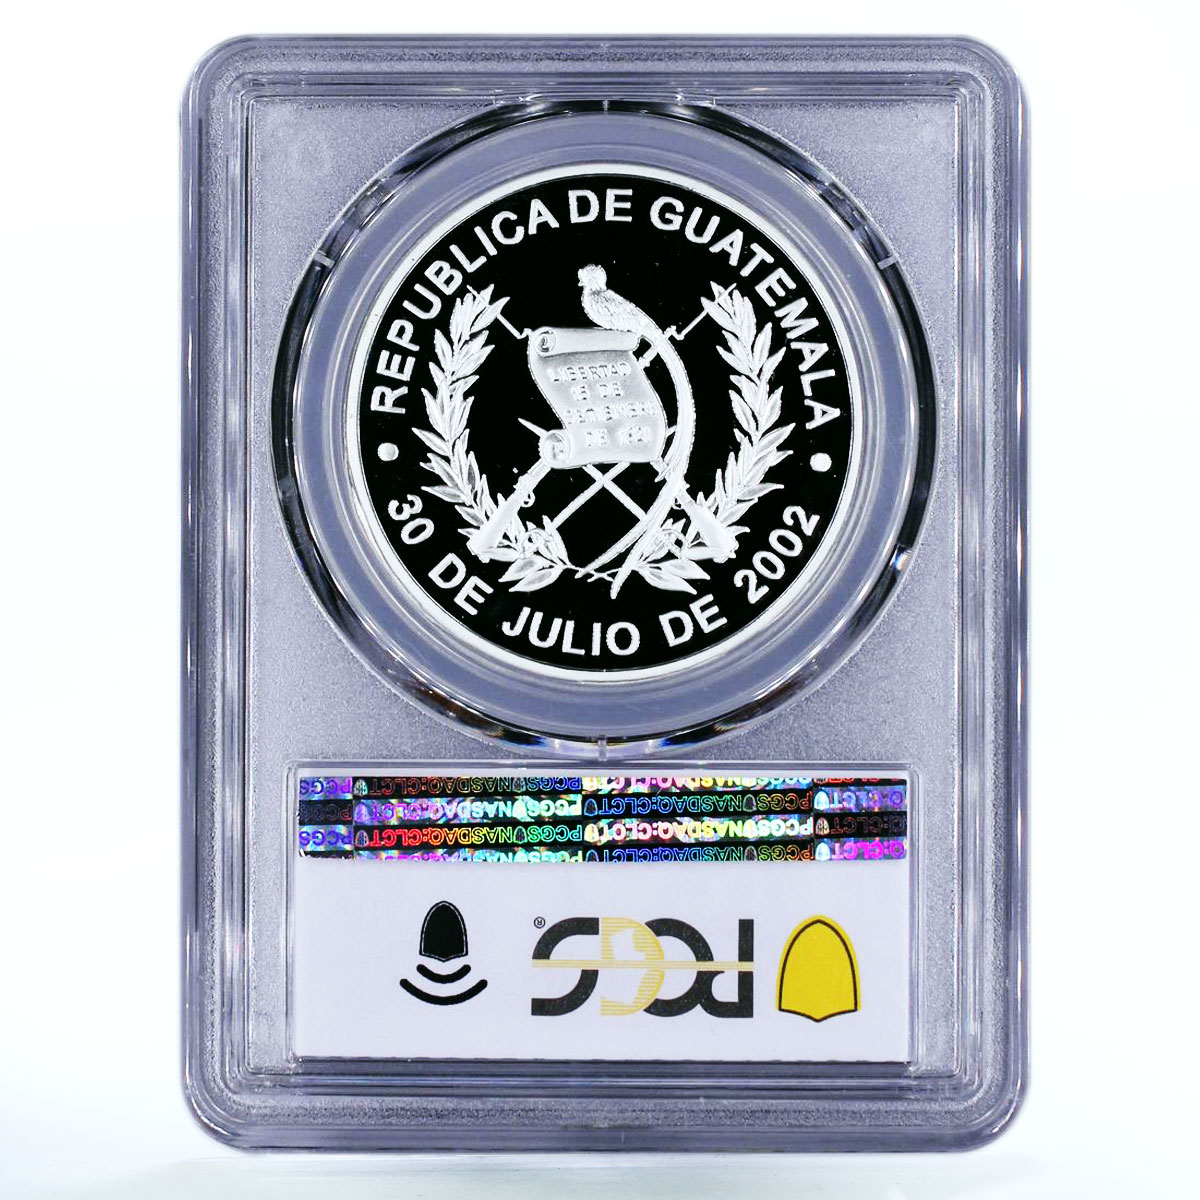 Guatemala 1 quetzal Holy Brother Pedro Betancourt PR69 PCGS silver coin 2002